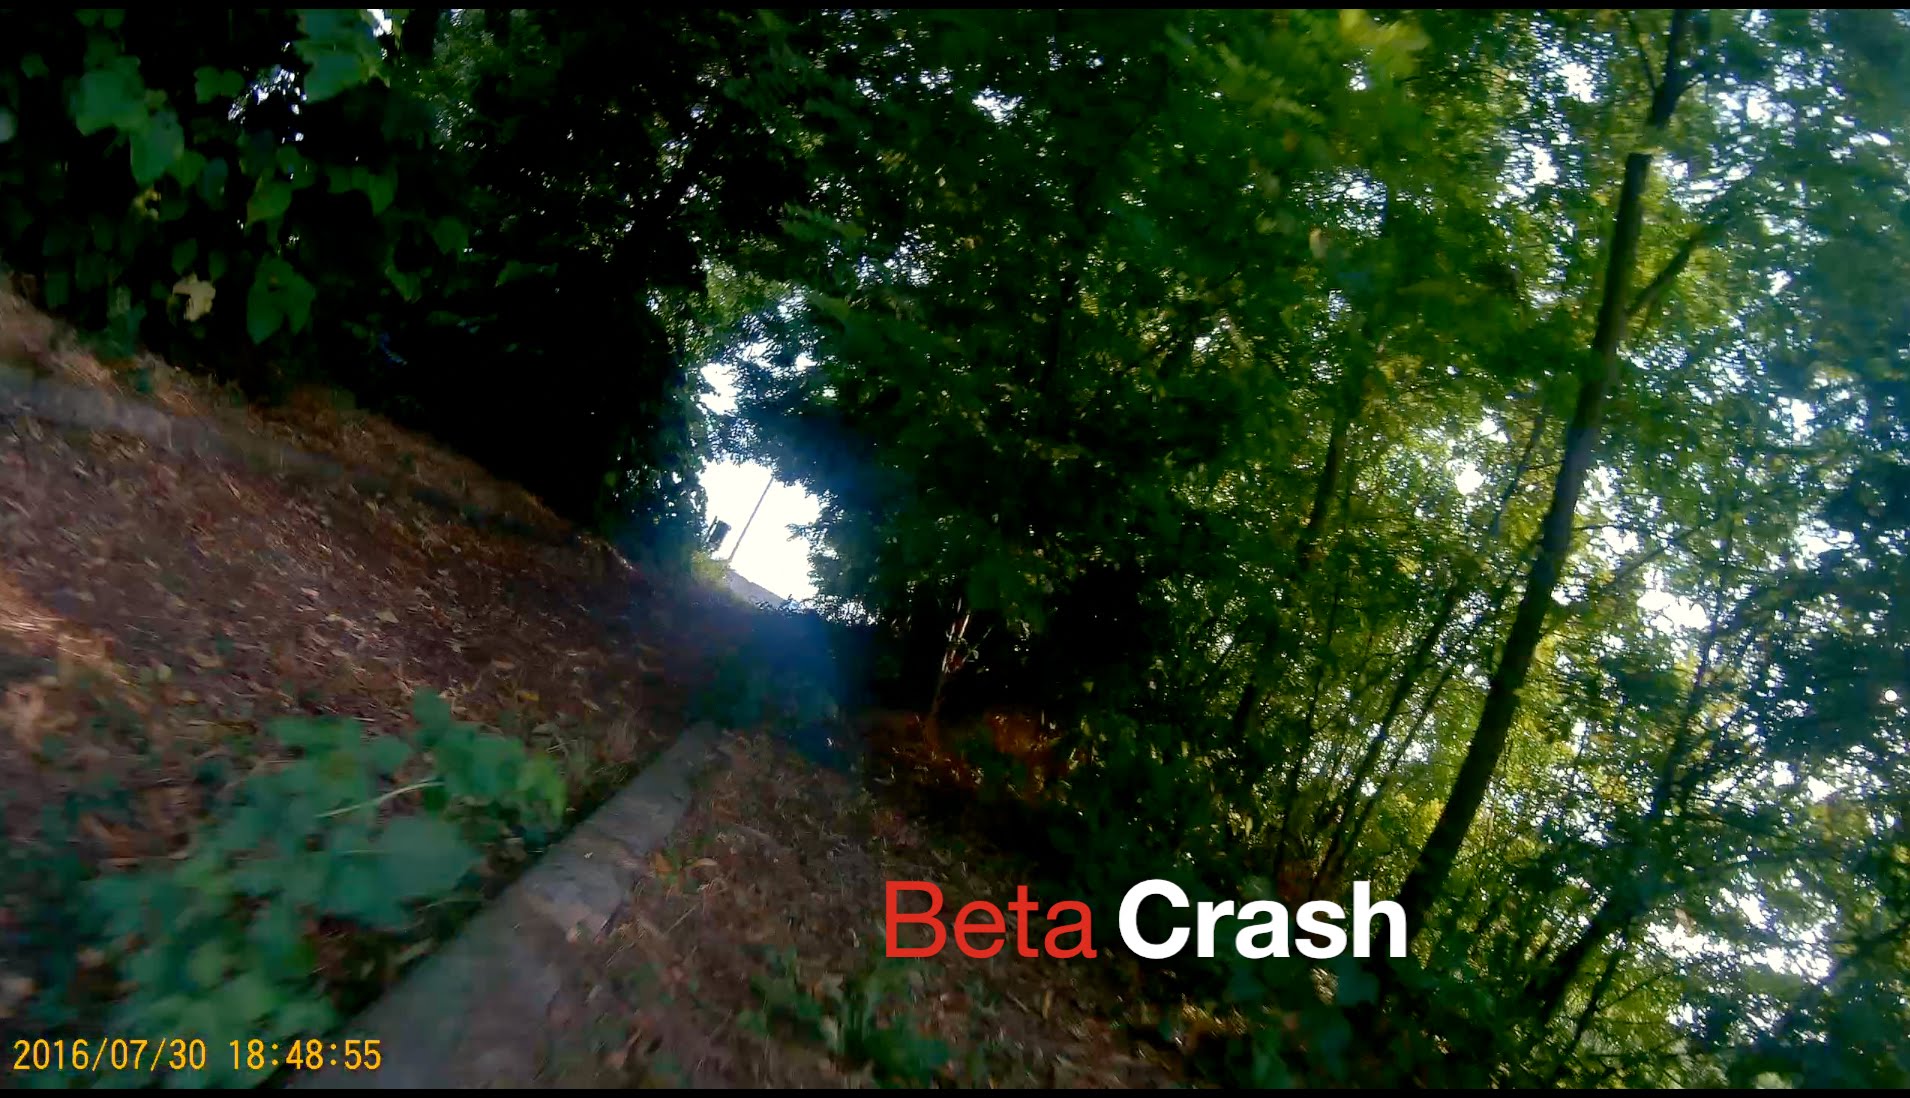 My first track tunnel training – fpv Drone Race – BetaCrash (Skydroners)